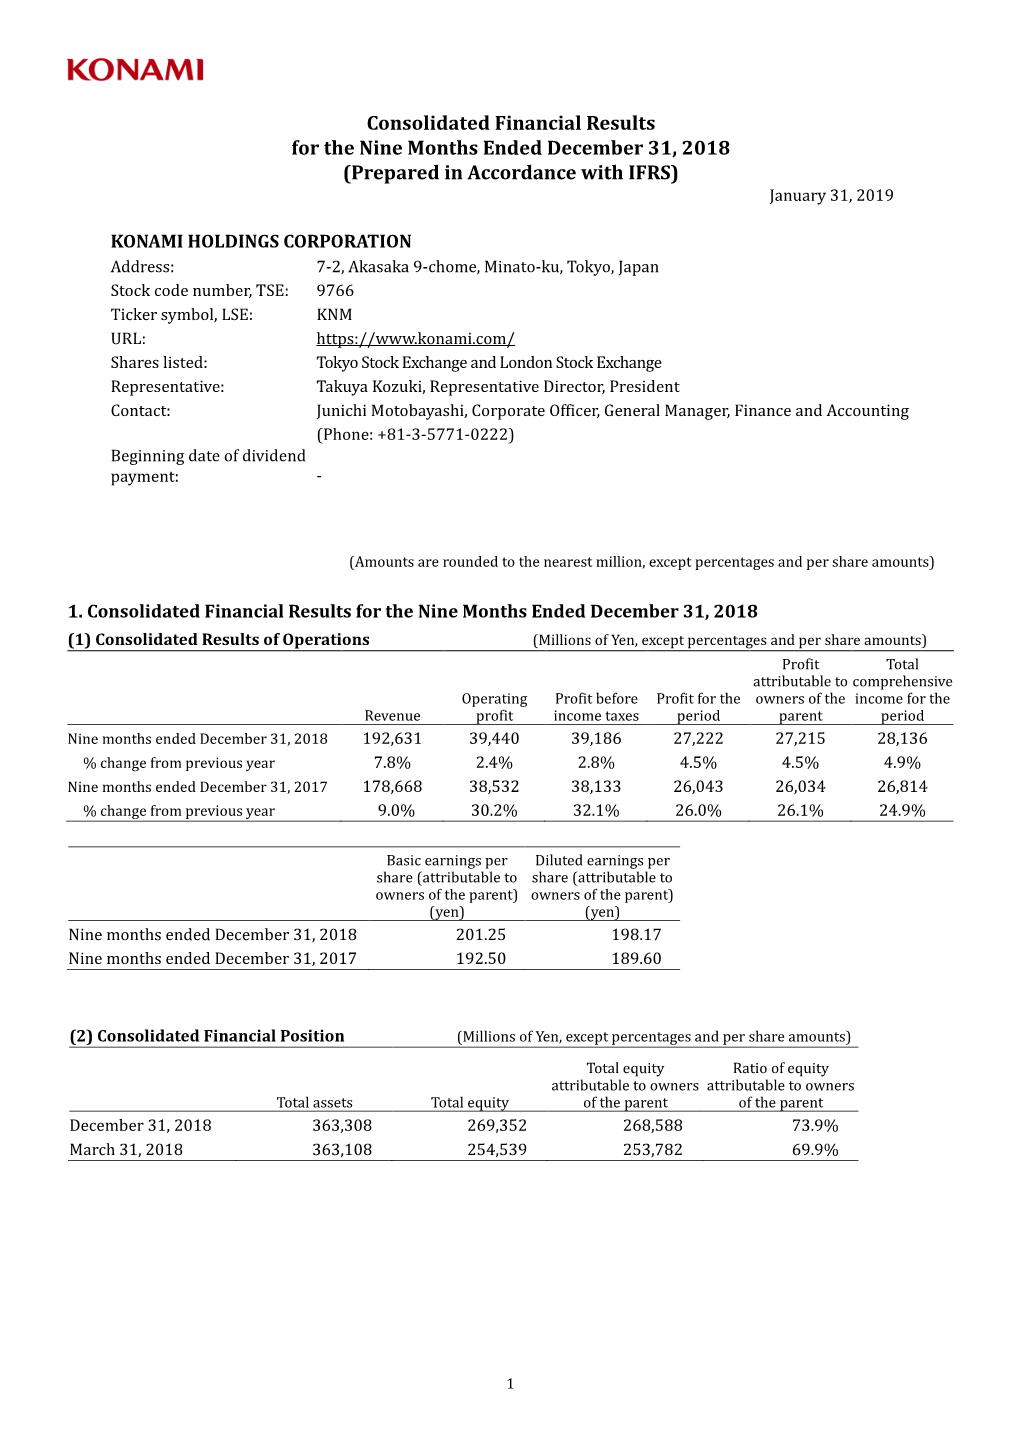 3Q FY2019 Consolidated Financial Results (PDF/532KB)